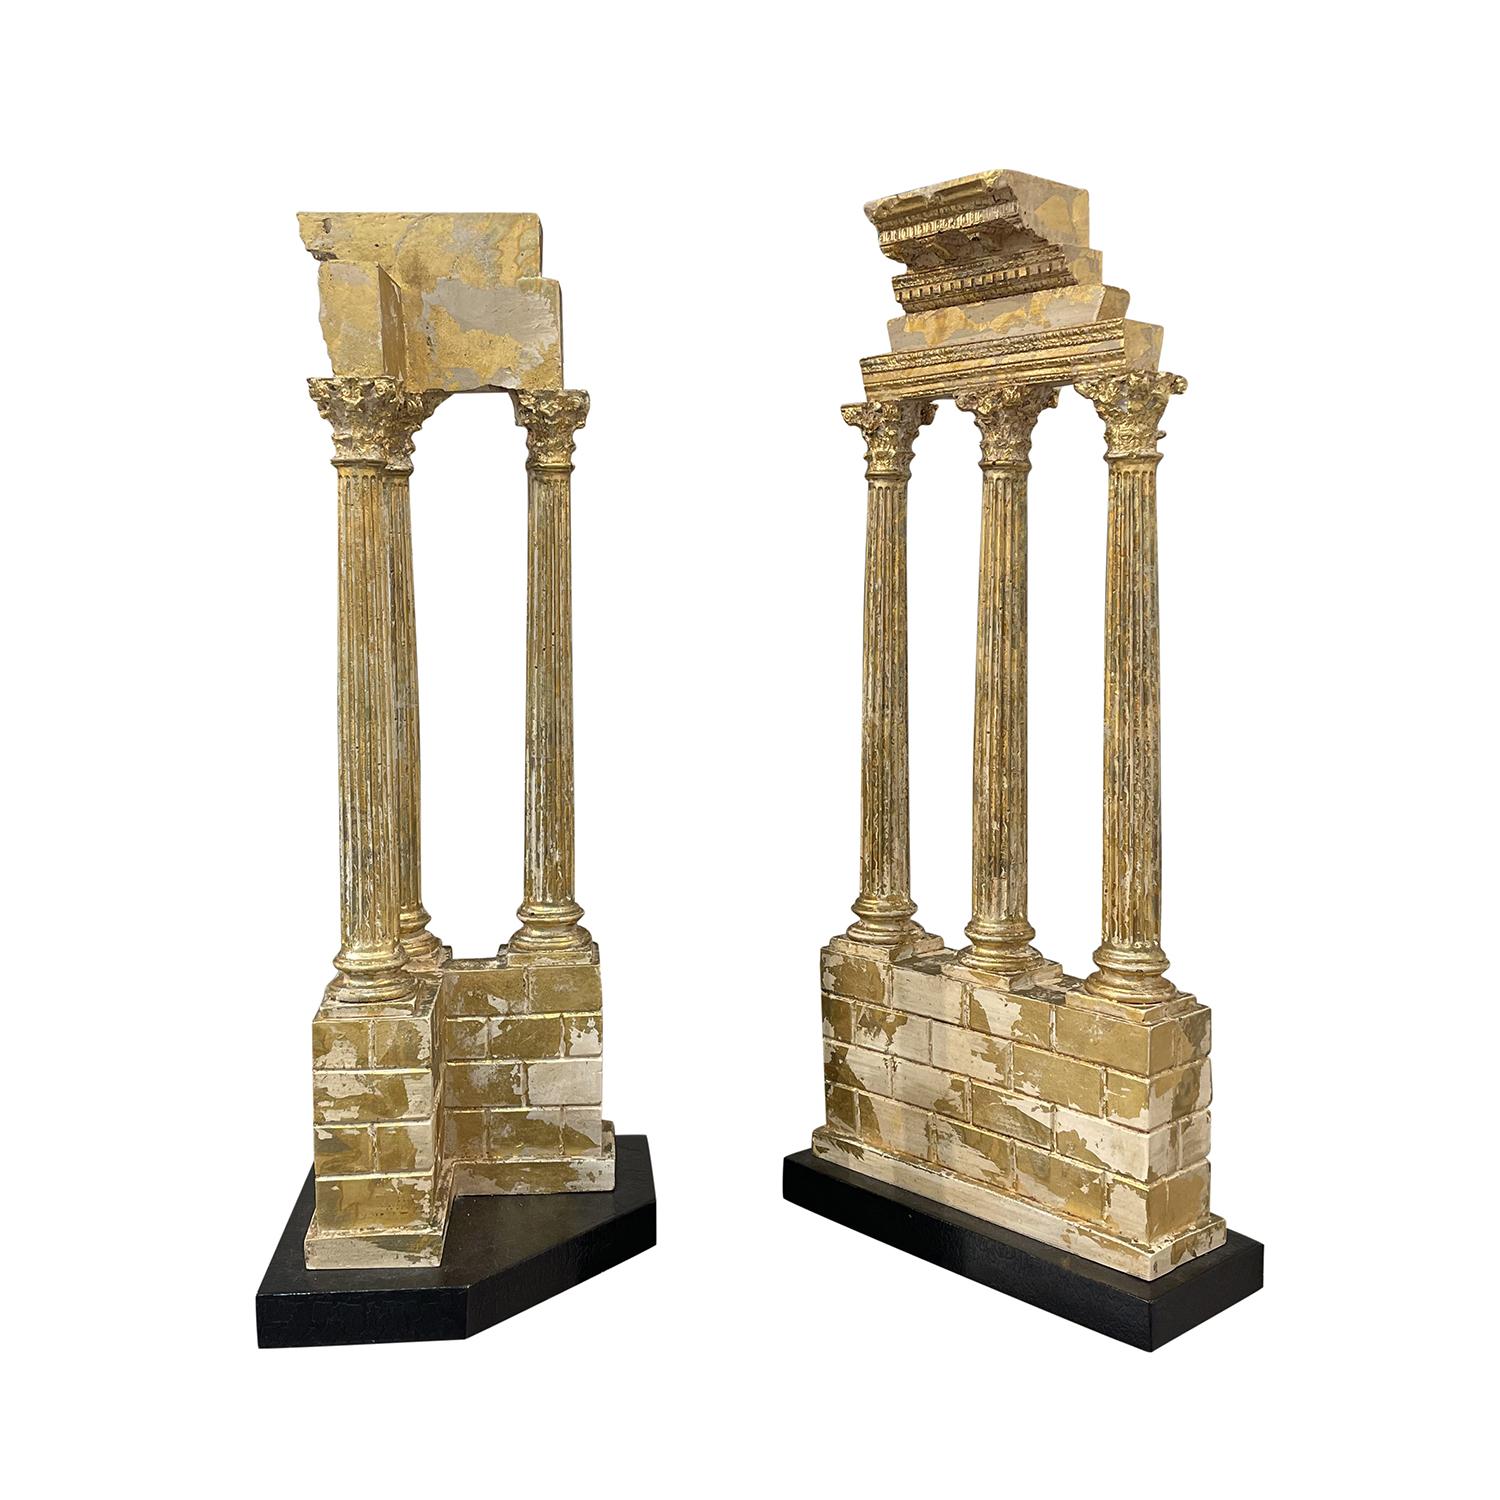 An antique Italian set of Grand Tour models, fragments of the temple of Castor and Pollux made of hand crafted gilt stone, in good condition. The detailed columns are resting on a rectangular base. Wear consistent with age and use. circa 1870 -